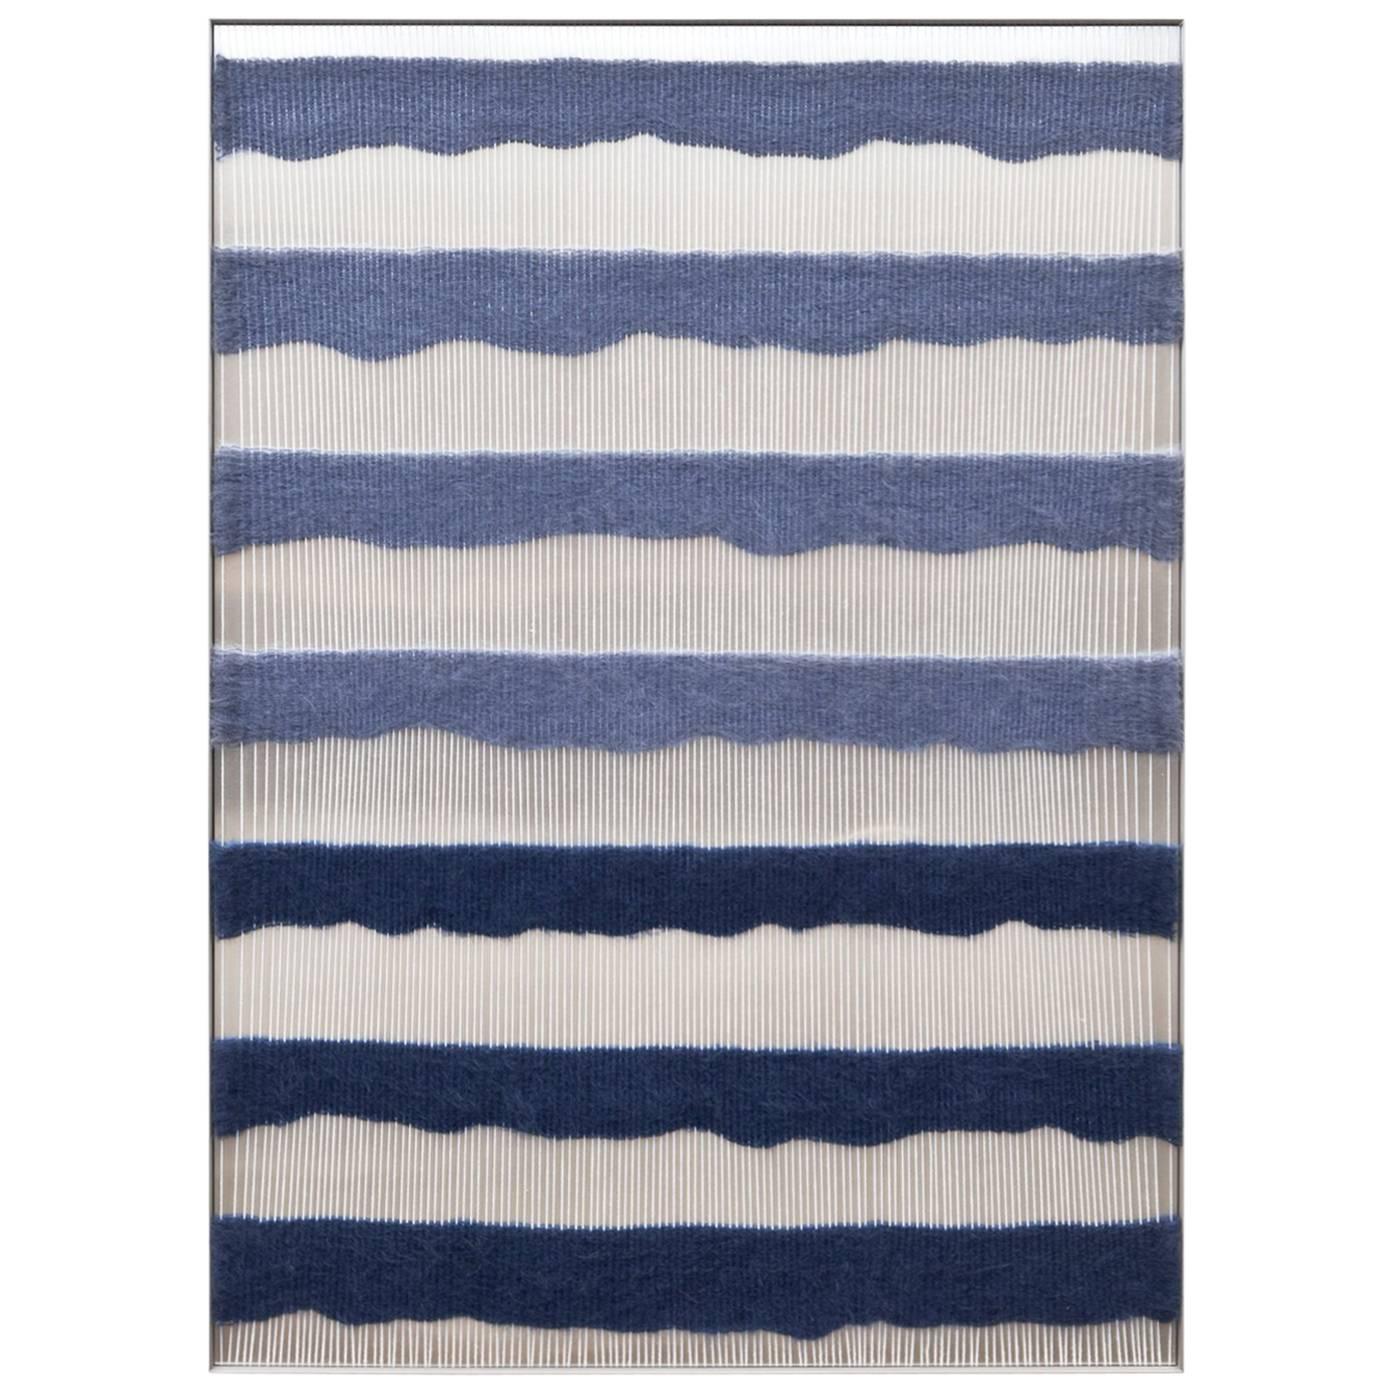 Contemporary Handwoven Wall Fiber Art, Periwinkle & Dark Blue by Mimi Jung